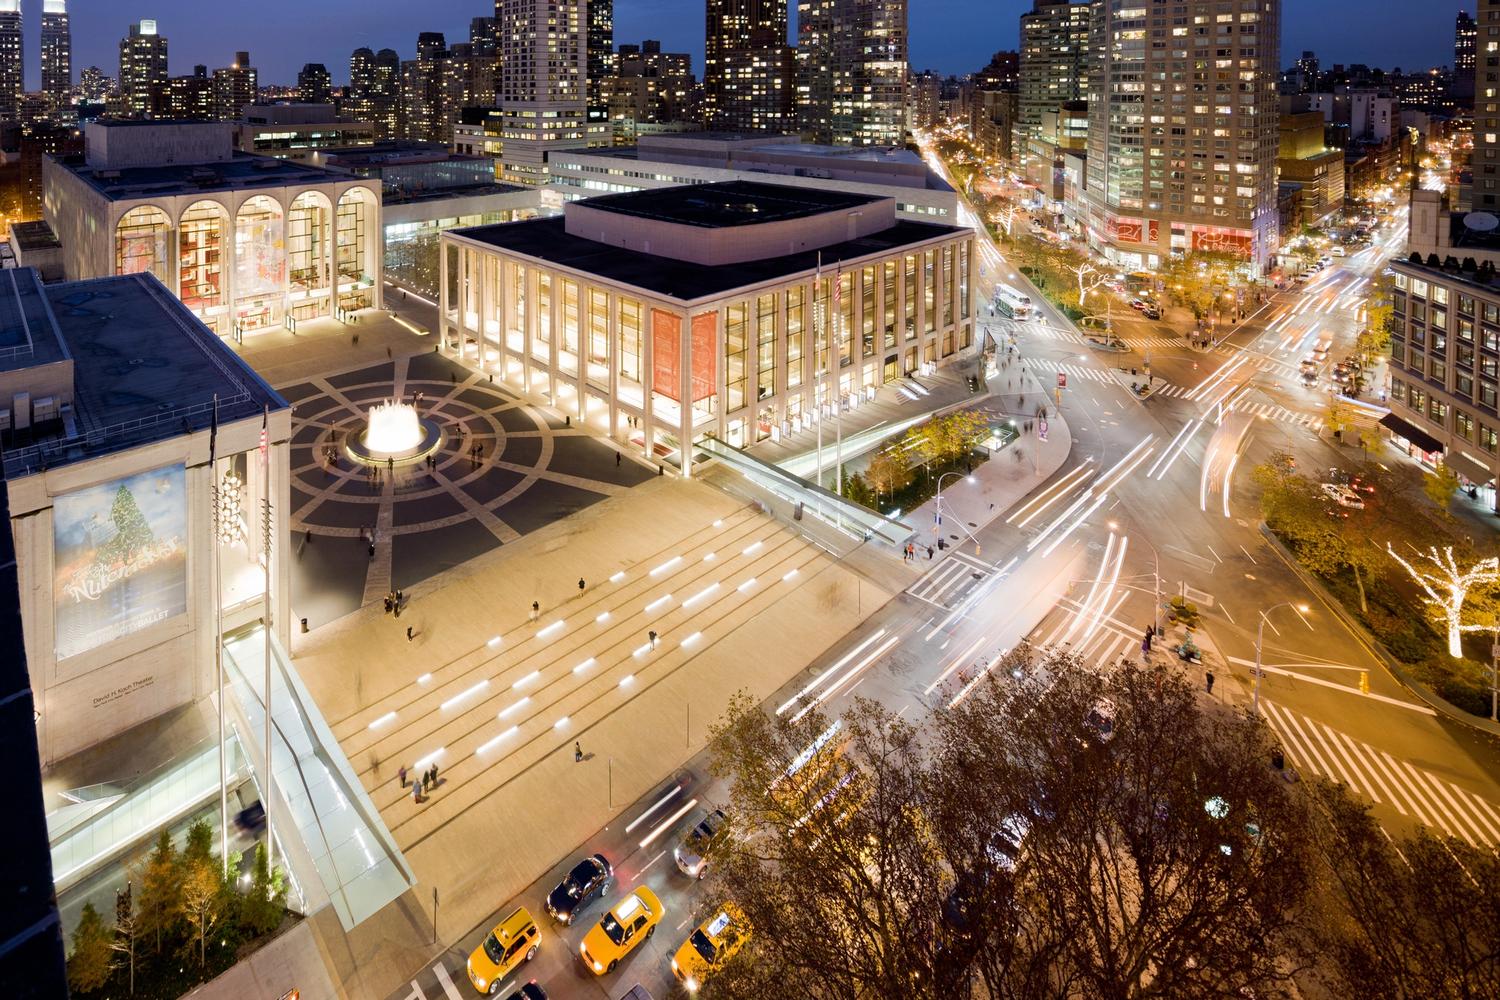 Lincoln Center for the Performing Arts - Diller Scofidio + Renfro